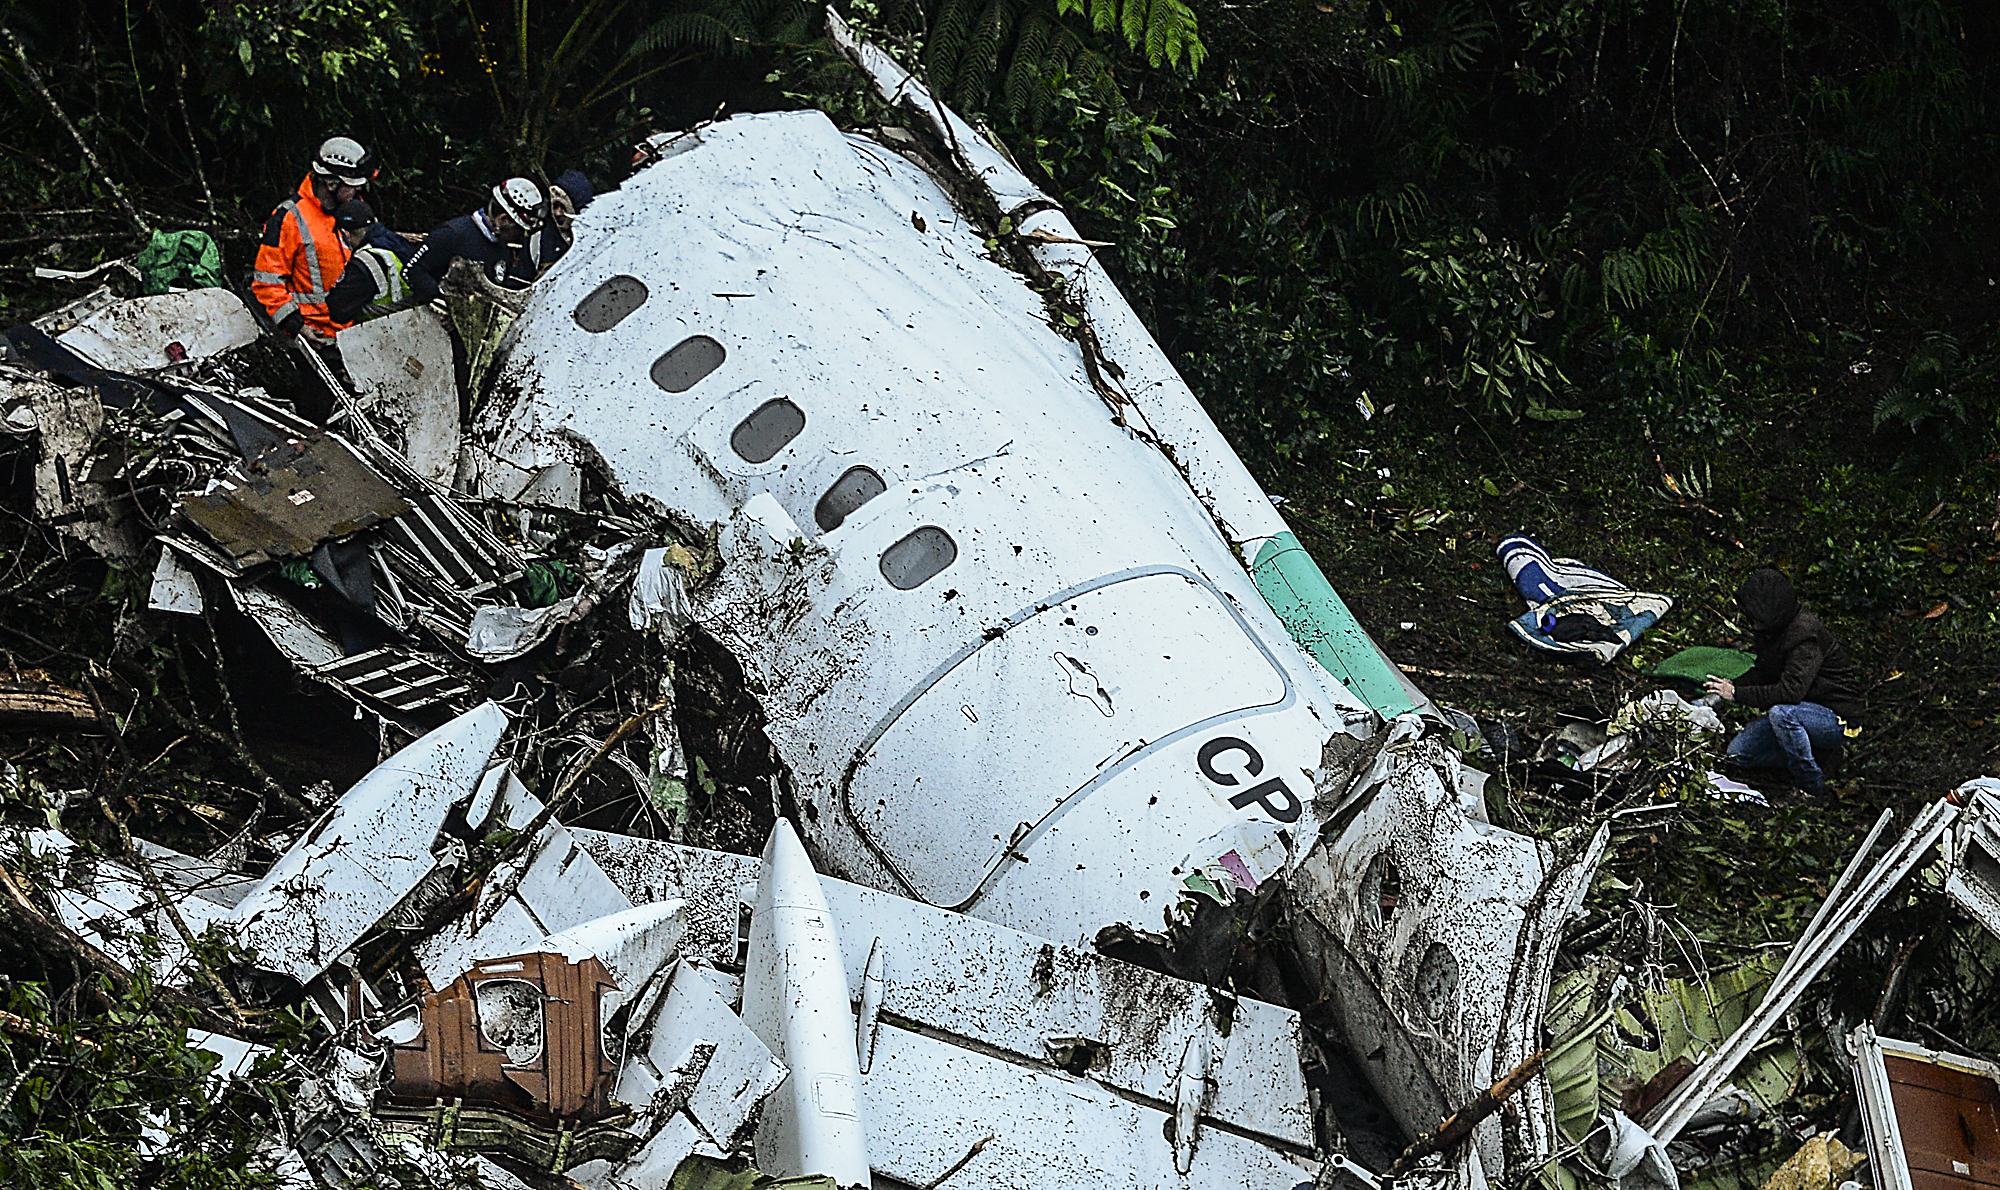 Rescue teams work in the recovery of the bodies of victims of the LAMIA airlines charter that crashed in the mountains of Cerro Gordo, municipality of La Union, Colombia, on November 29, 2016 carrying members of the Brazilian football team Chapecoense Real. A charter plane carrying the Brazilian football team crashed in the mountains in Colombia late Monday, killing as many as 75 people, officials said. / AFP PHOTO / STR / RAUL ARBOLEDA